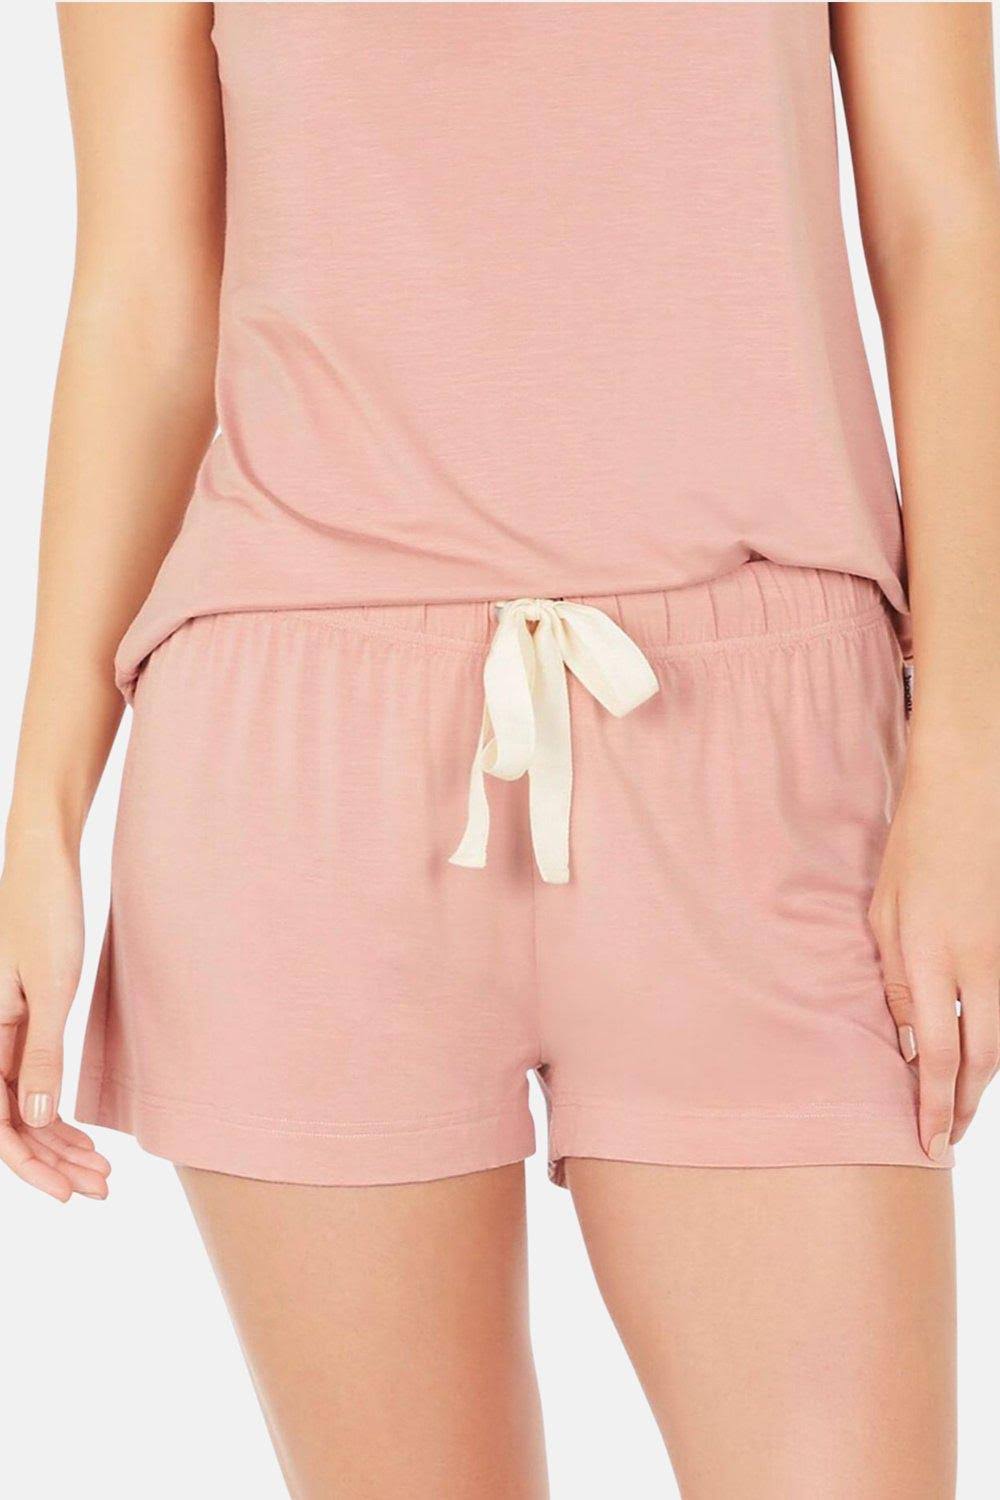 Boody | Goodnight Sleep Short in Dusty Pink | Size S